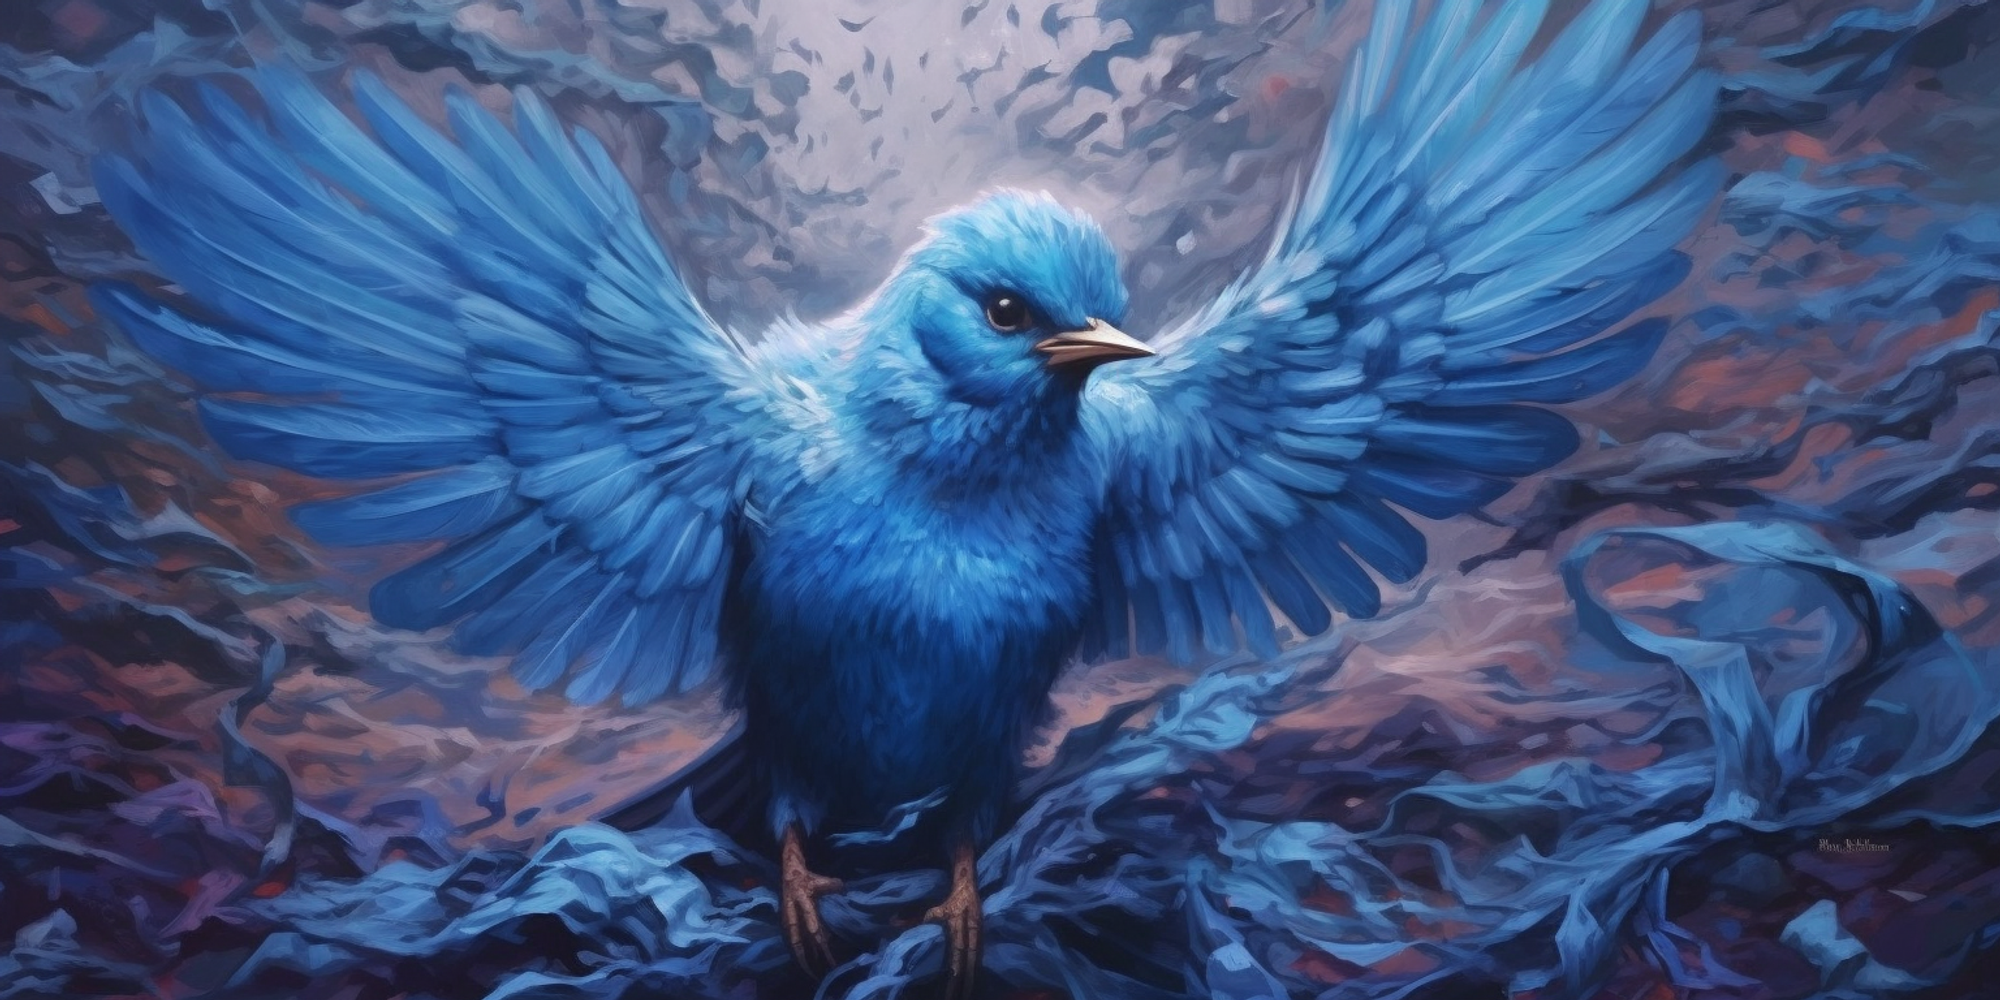 moodyanna_Twitter_a_blue_bird_immersed_in_blue_paint_with_incre_82daf53f-5a64-4fe7-ae61-39fc4cf13fce.png